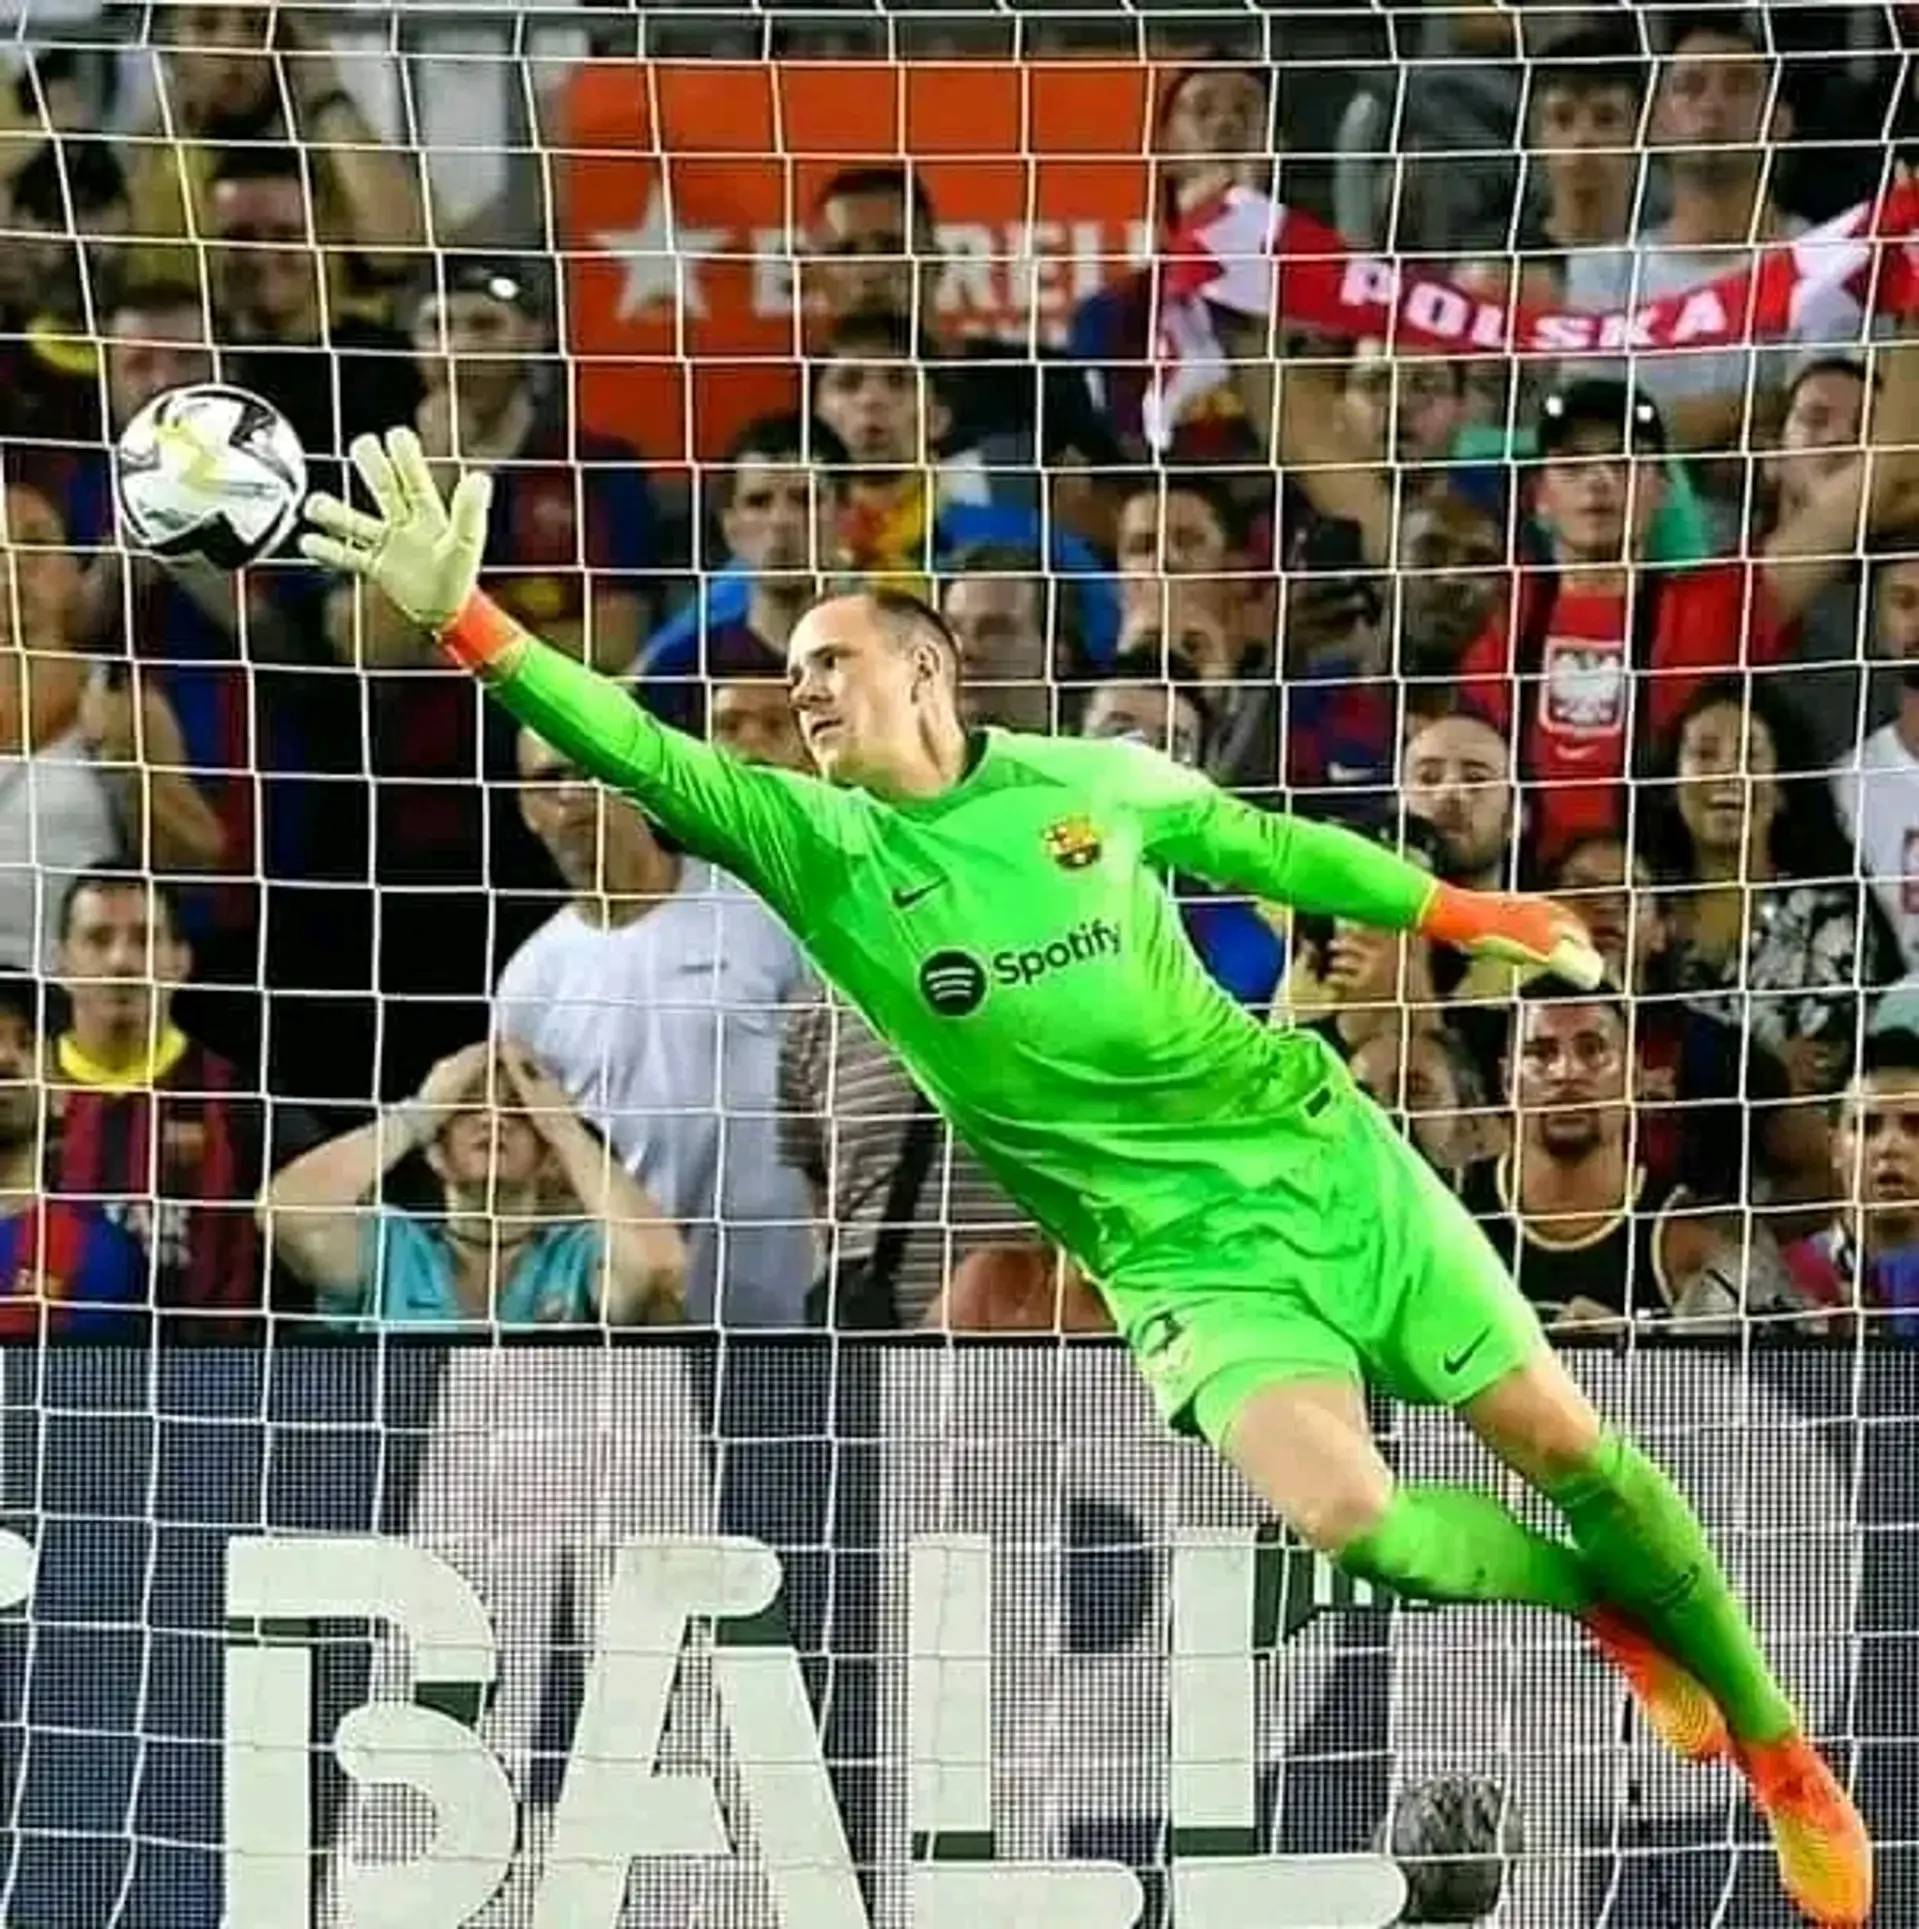 Stergen make some few brilliant saves tonight that help us defeat Napoli.